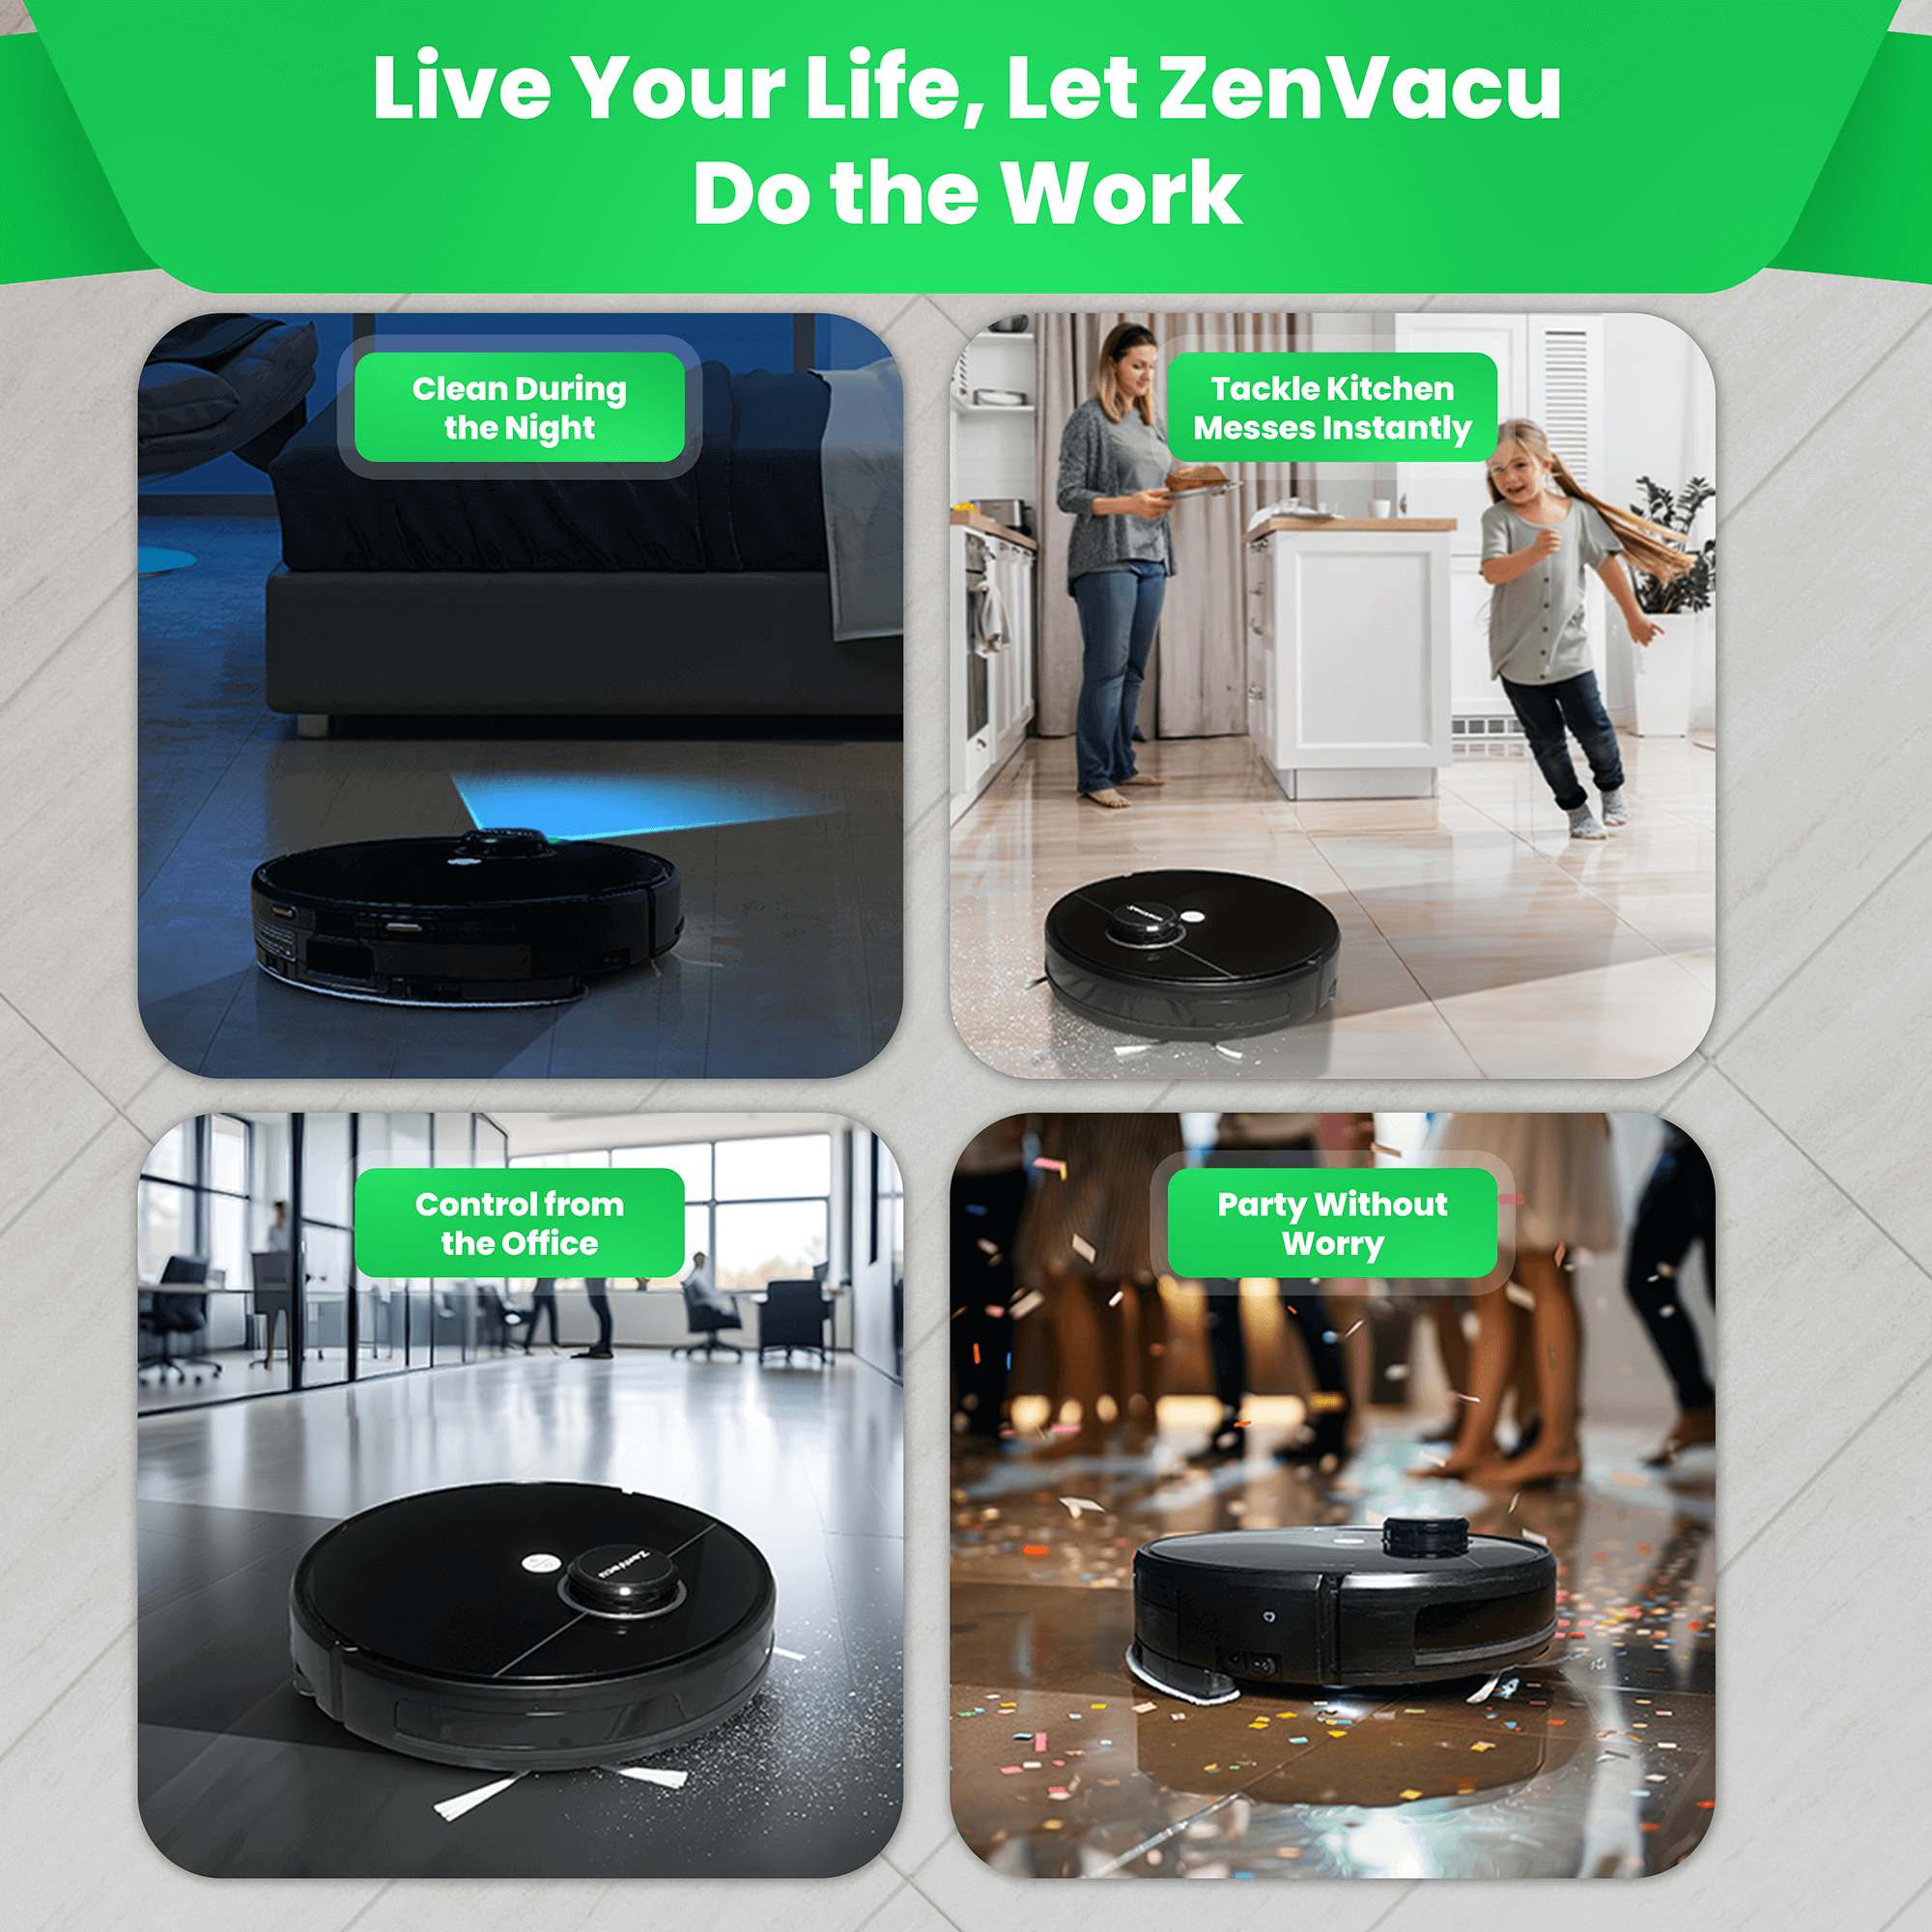 Let ZenVacu do the heavy lifting for you. The G8 Pro is fully automatic and handles all cleaning tasks, allowing you to stop cleaning and enjoy your free time.